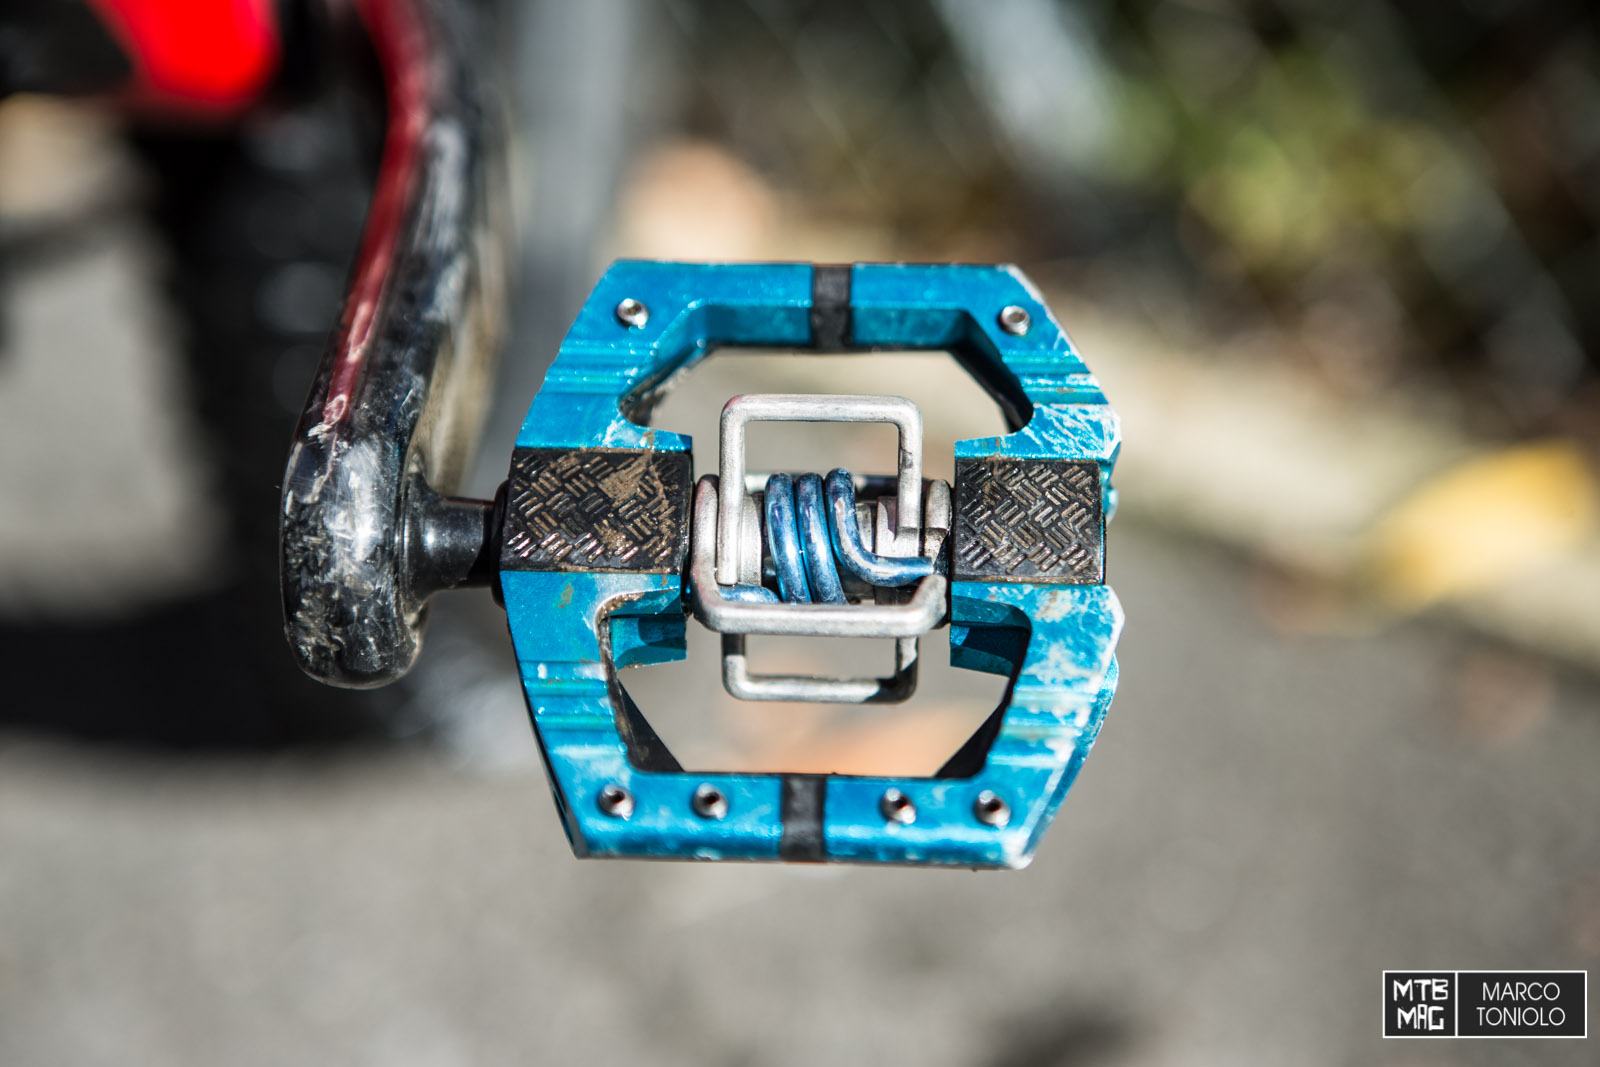 systeem Bibliografie George Eliot Tested] Crank Brothers Mallet E Pedals | MTB-MAG.COM